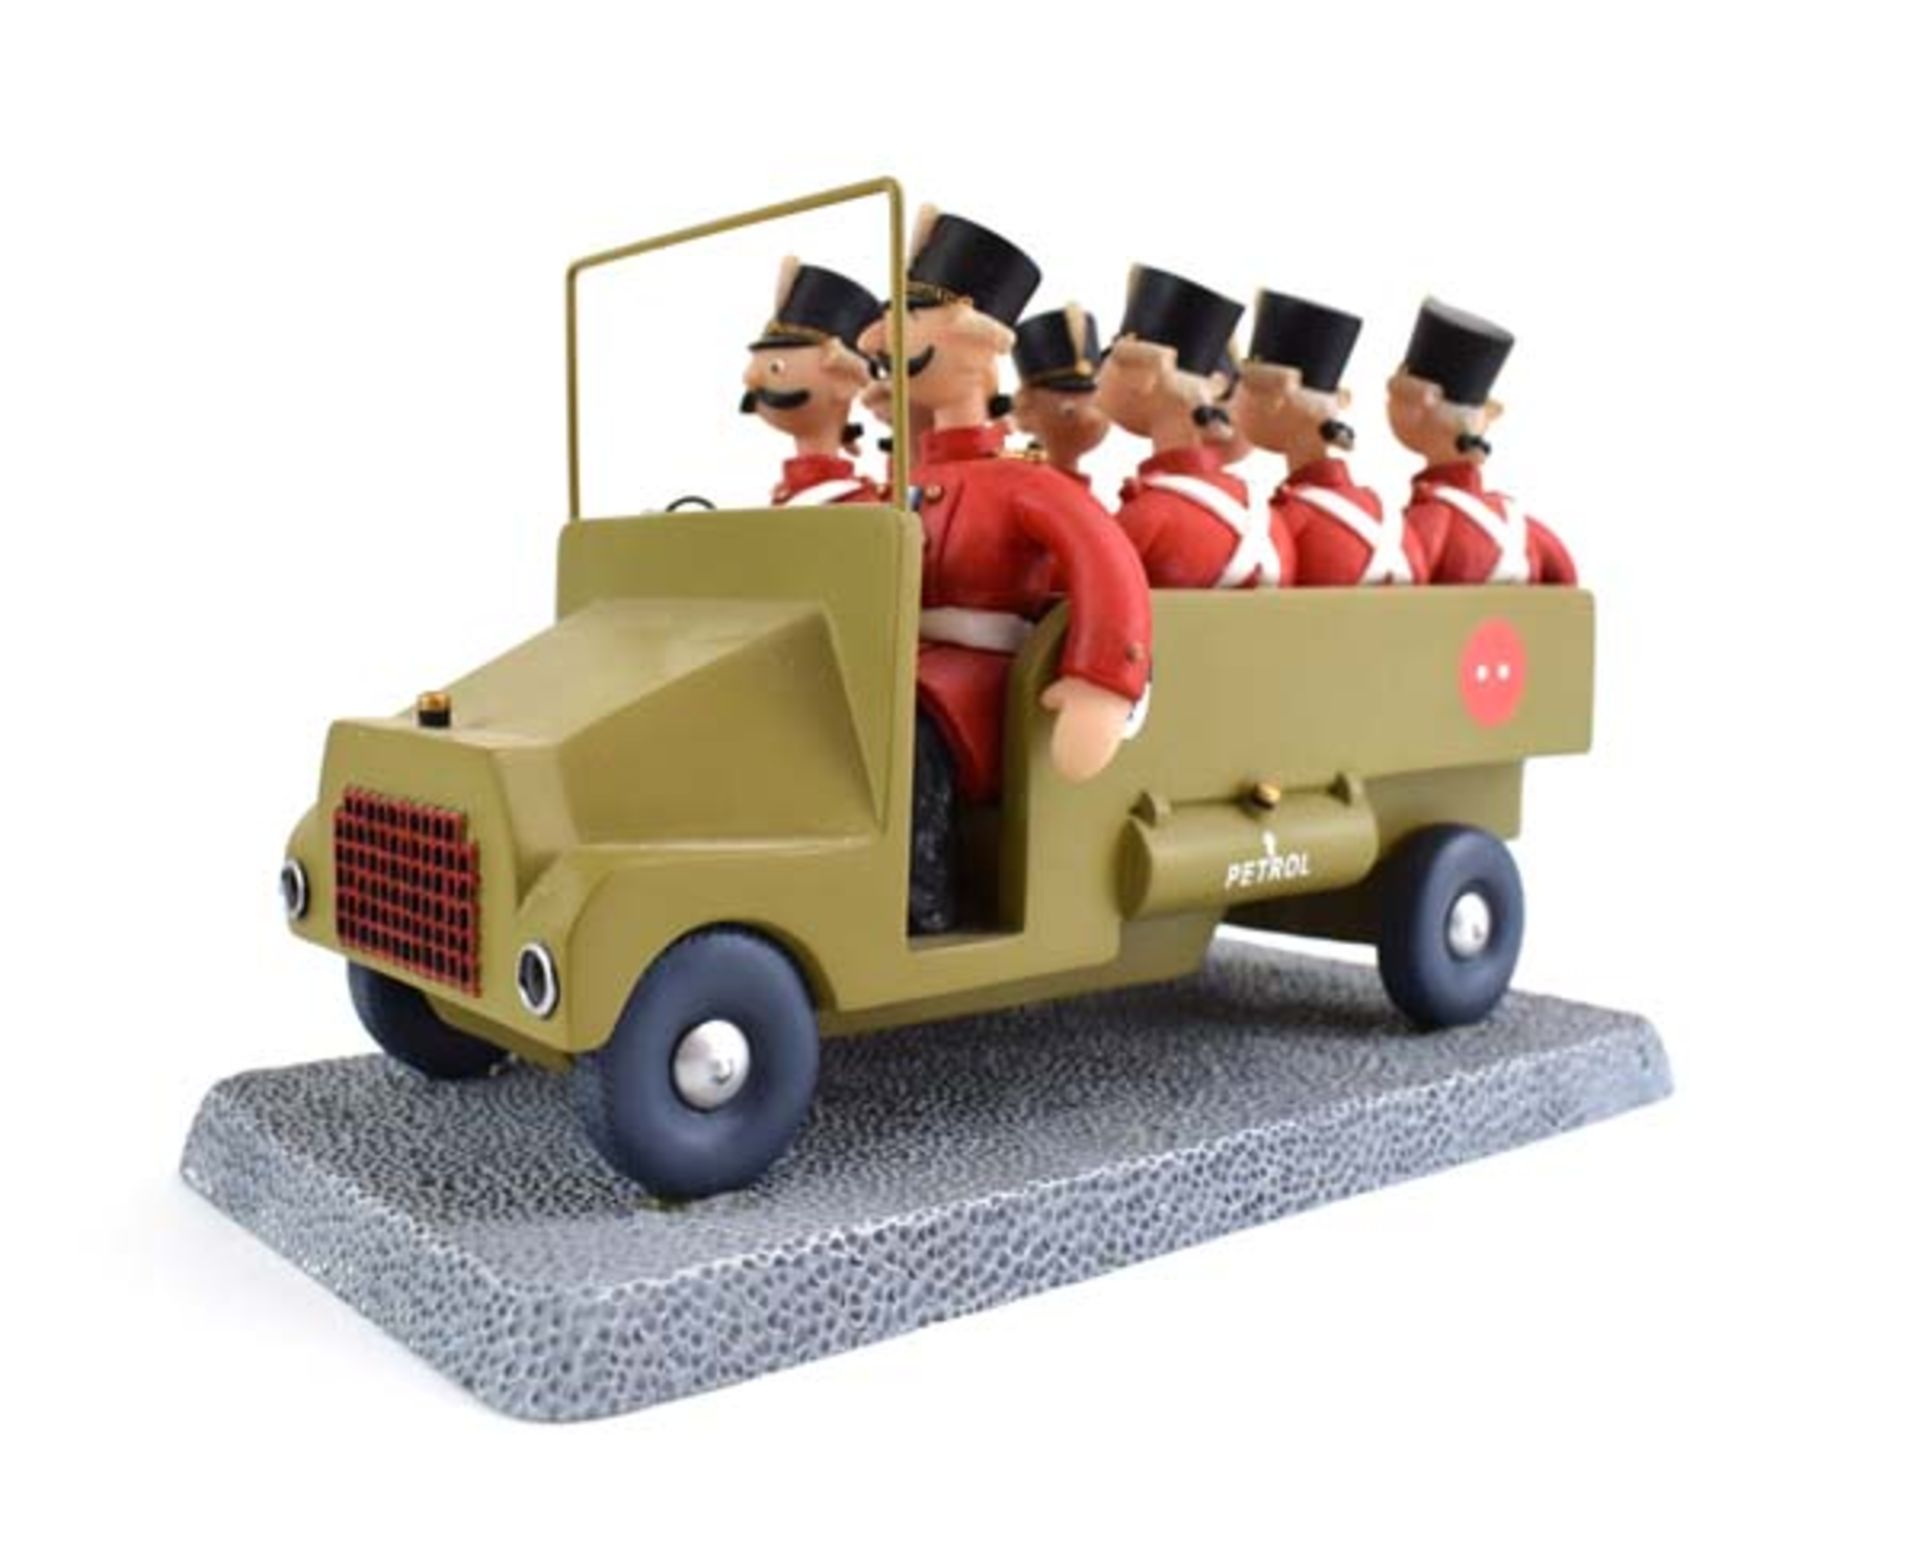 A Robert Harrop Camberwick Green figure: CG94 The Army Truck, boxed - Image 2 of 3